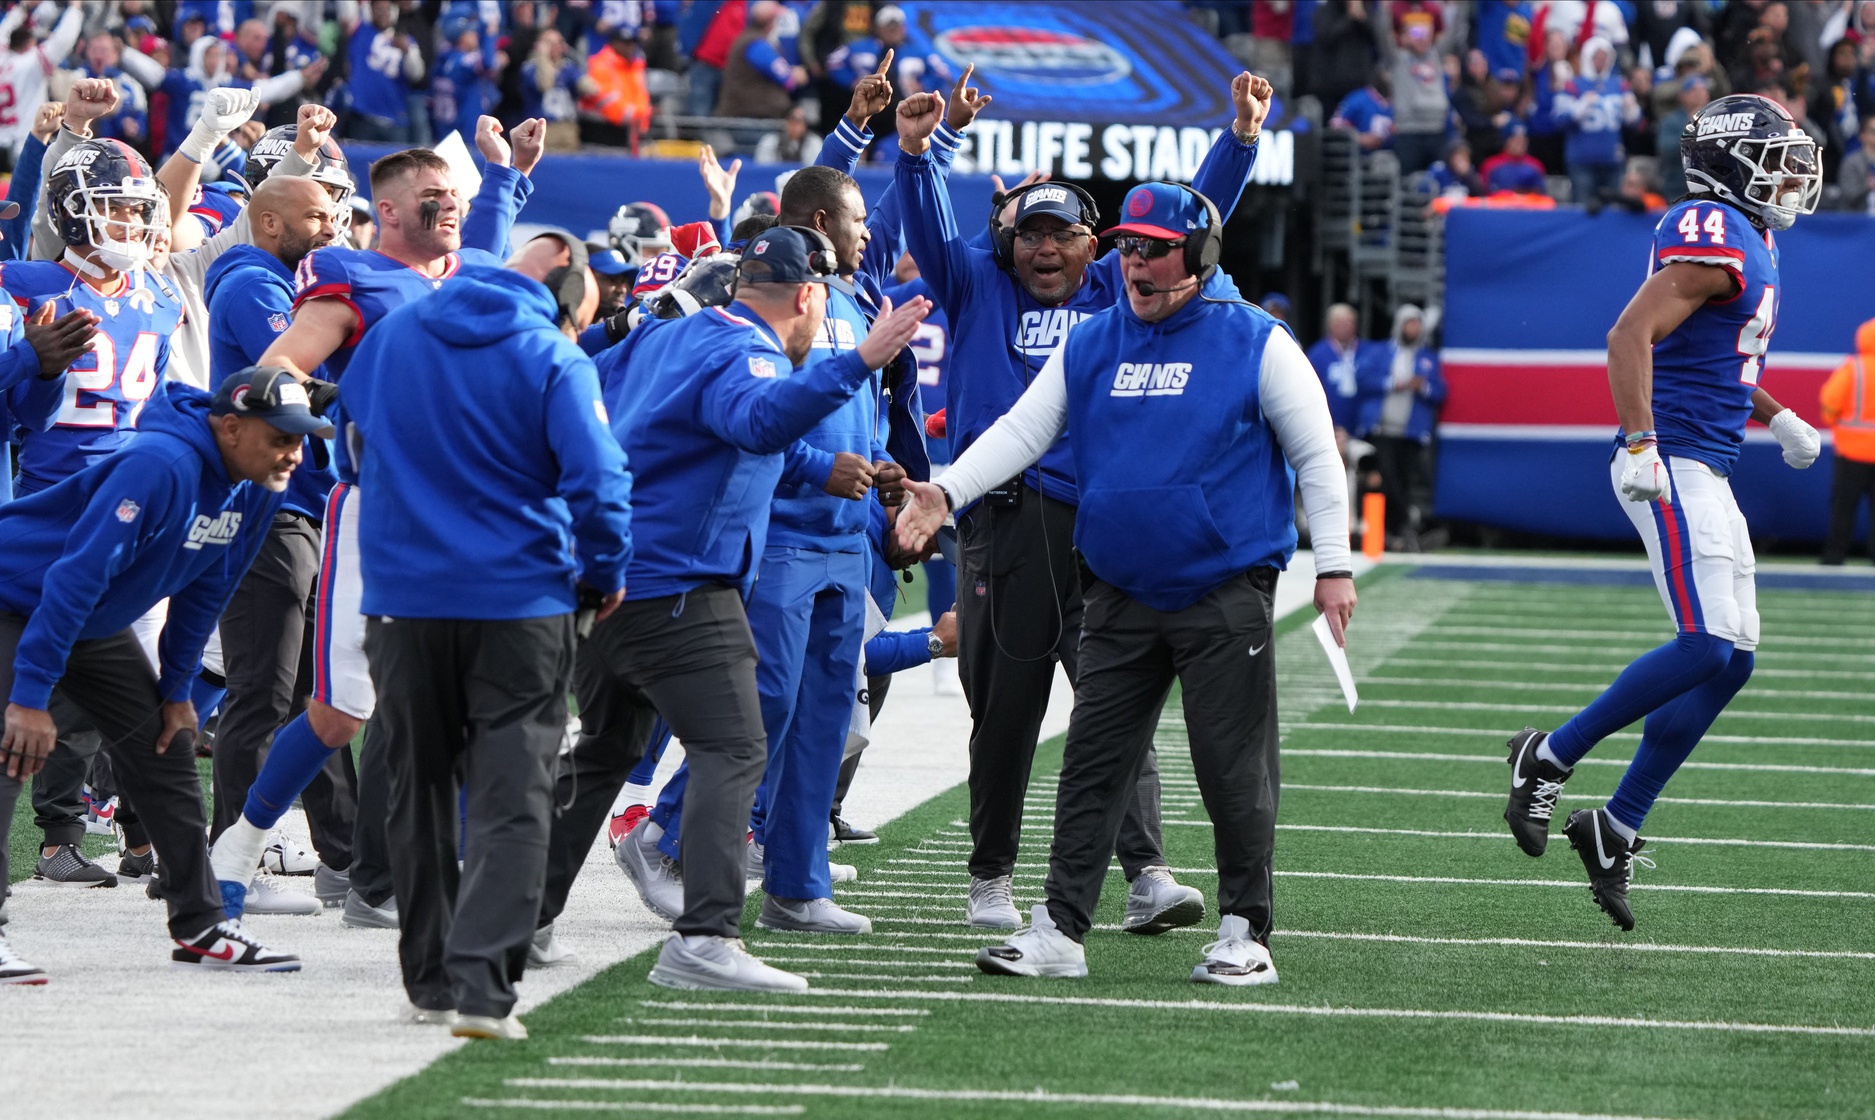 East Rutherford, NJ October 22, 2023 -- The Giants sideline after a stop on a fourth down play that sealed the game for the Giants. The NY Giants host the Washington Commanders at MetLife Stadium in East Rutherford, NJ on October 22, 2023.